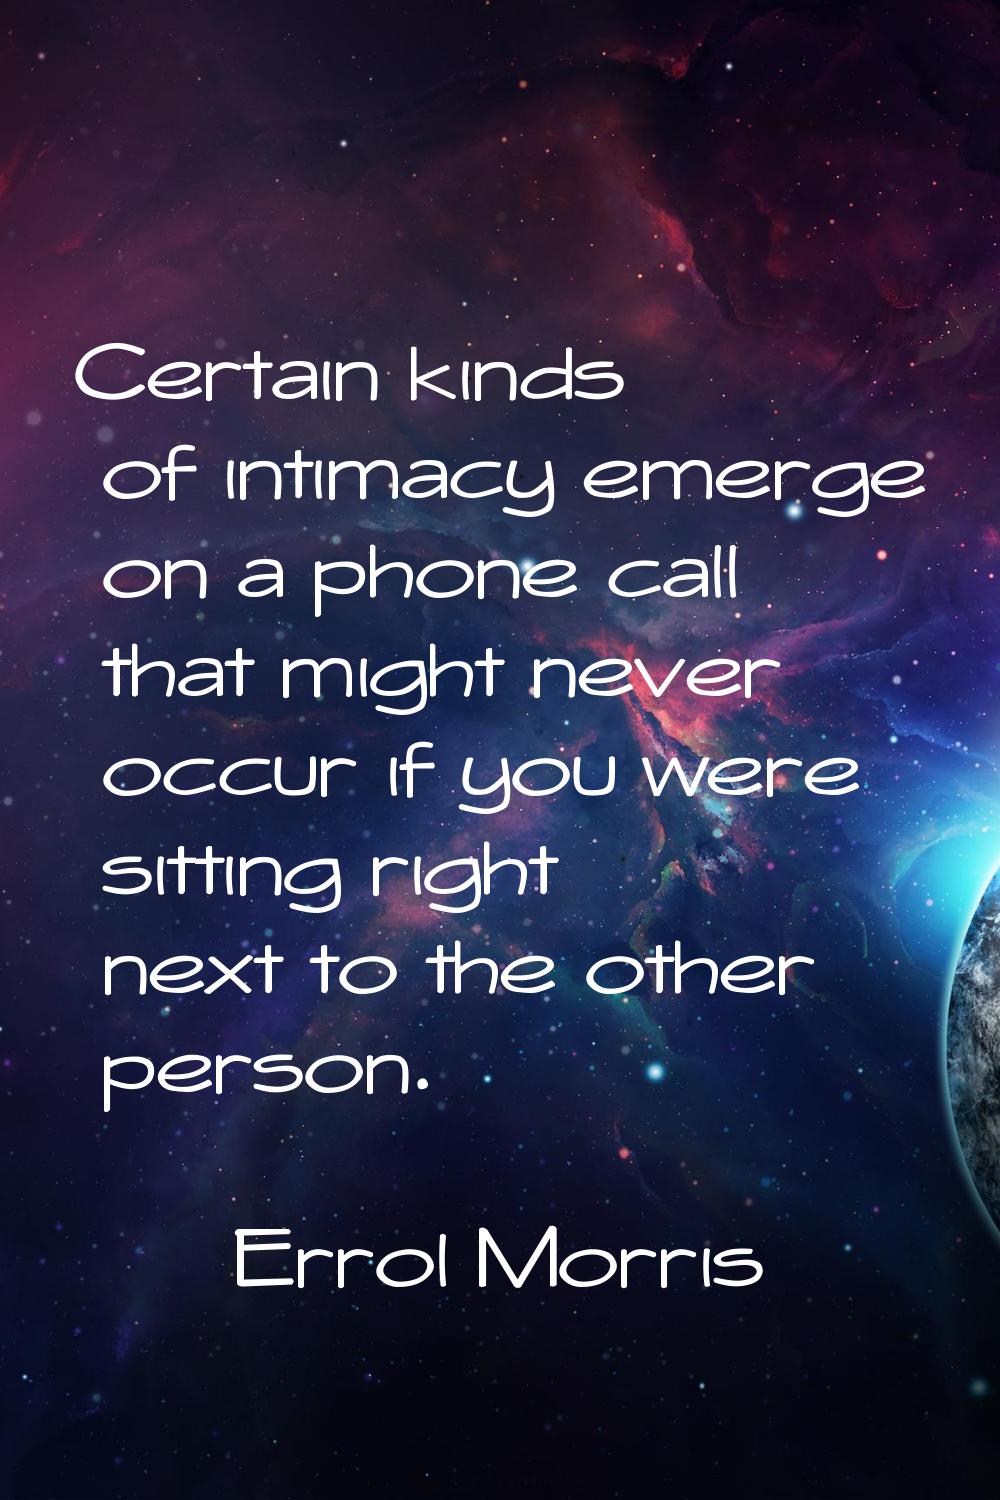 Certain kinds of intimacy emerge on a phone call that might never occur if you were sitting right n